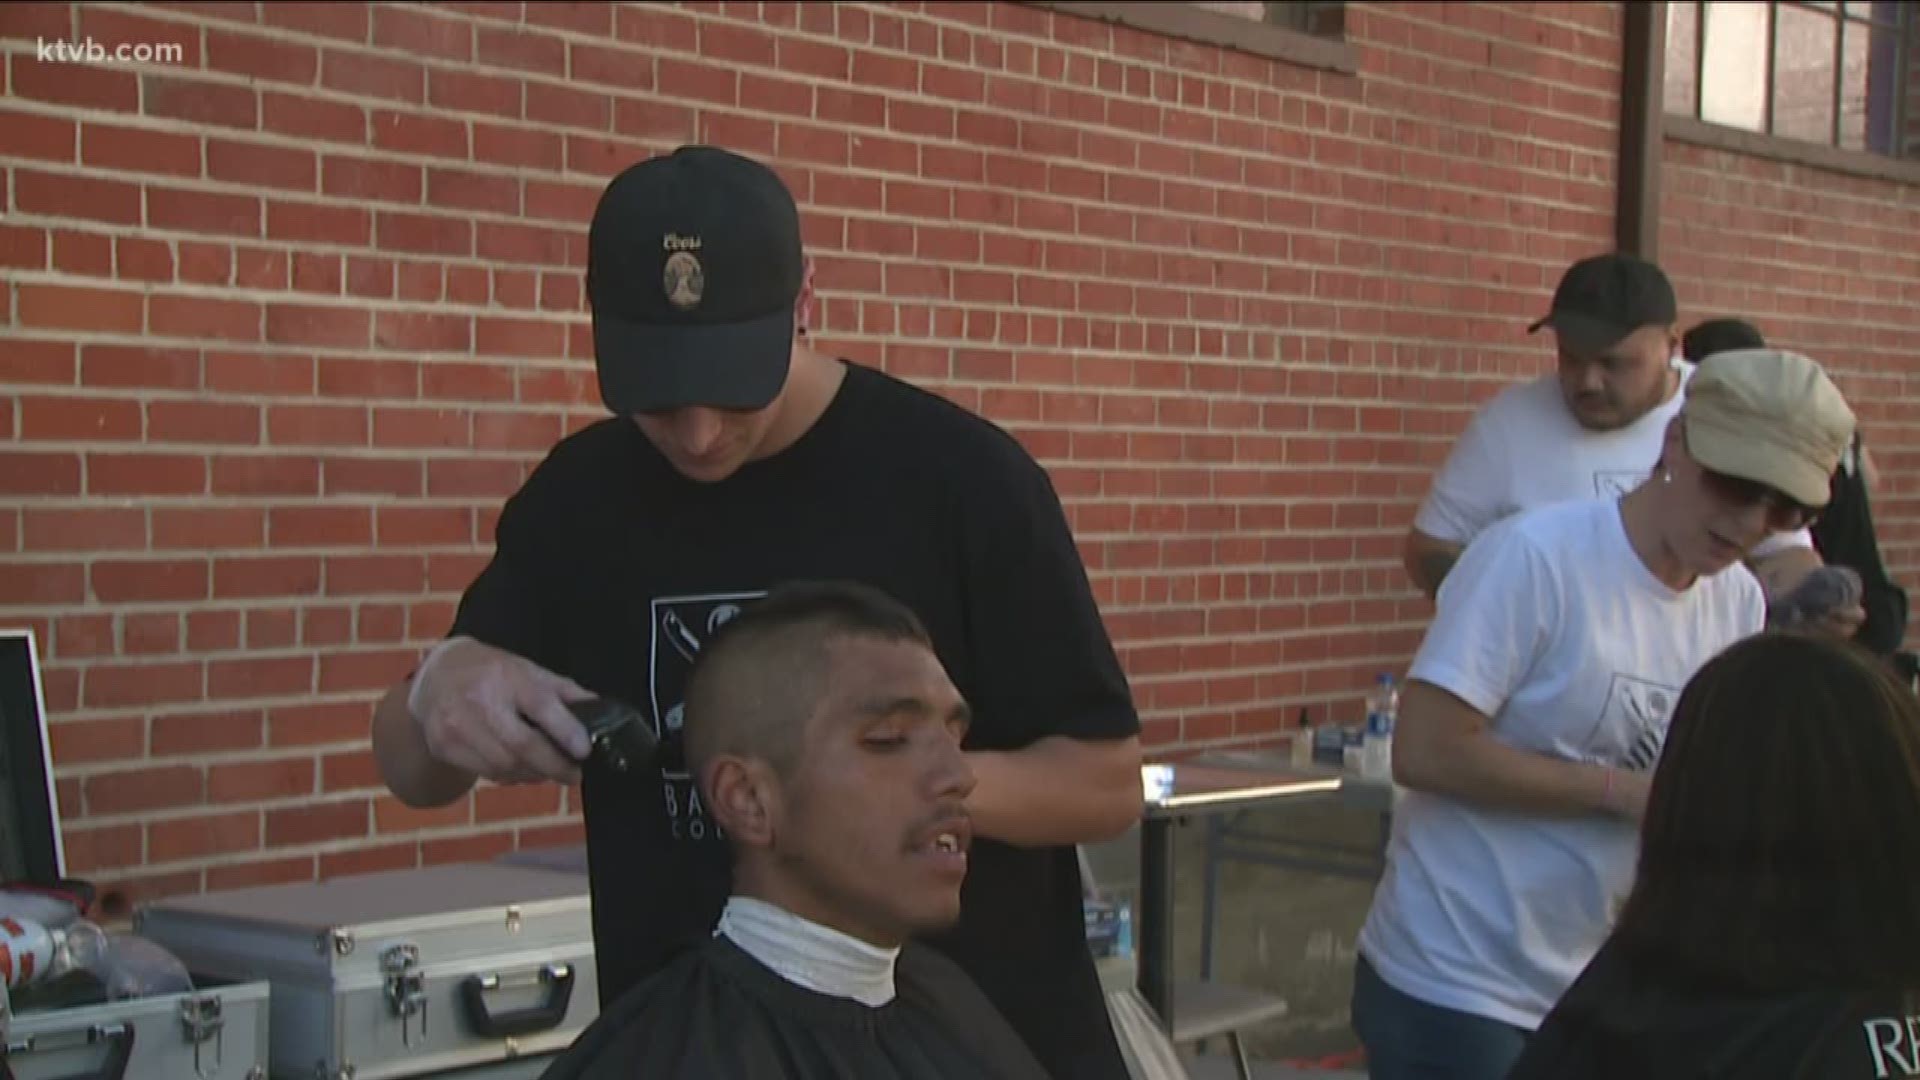 The event was called Neighbor and about 150 people were given free haircuts from the Boise Barber College, turkey legs and ice cream from Brown Surgga Soul Food, and